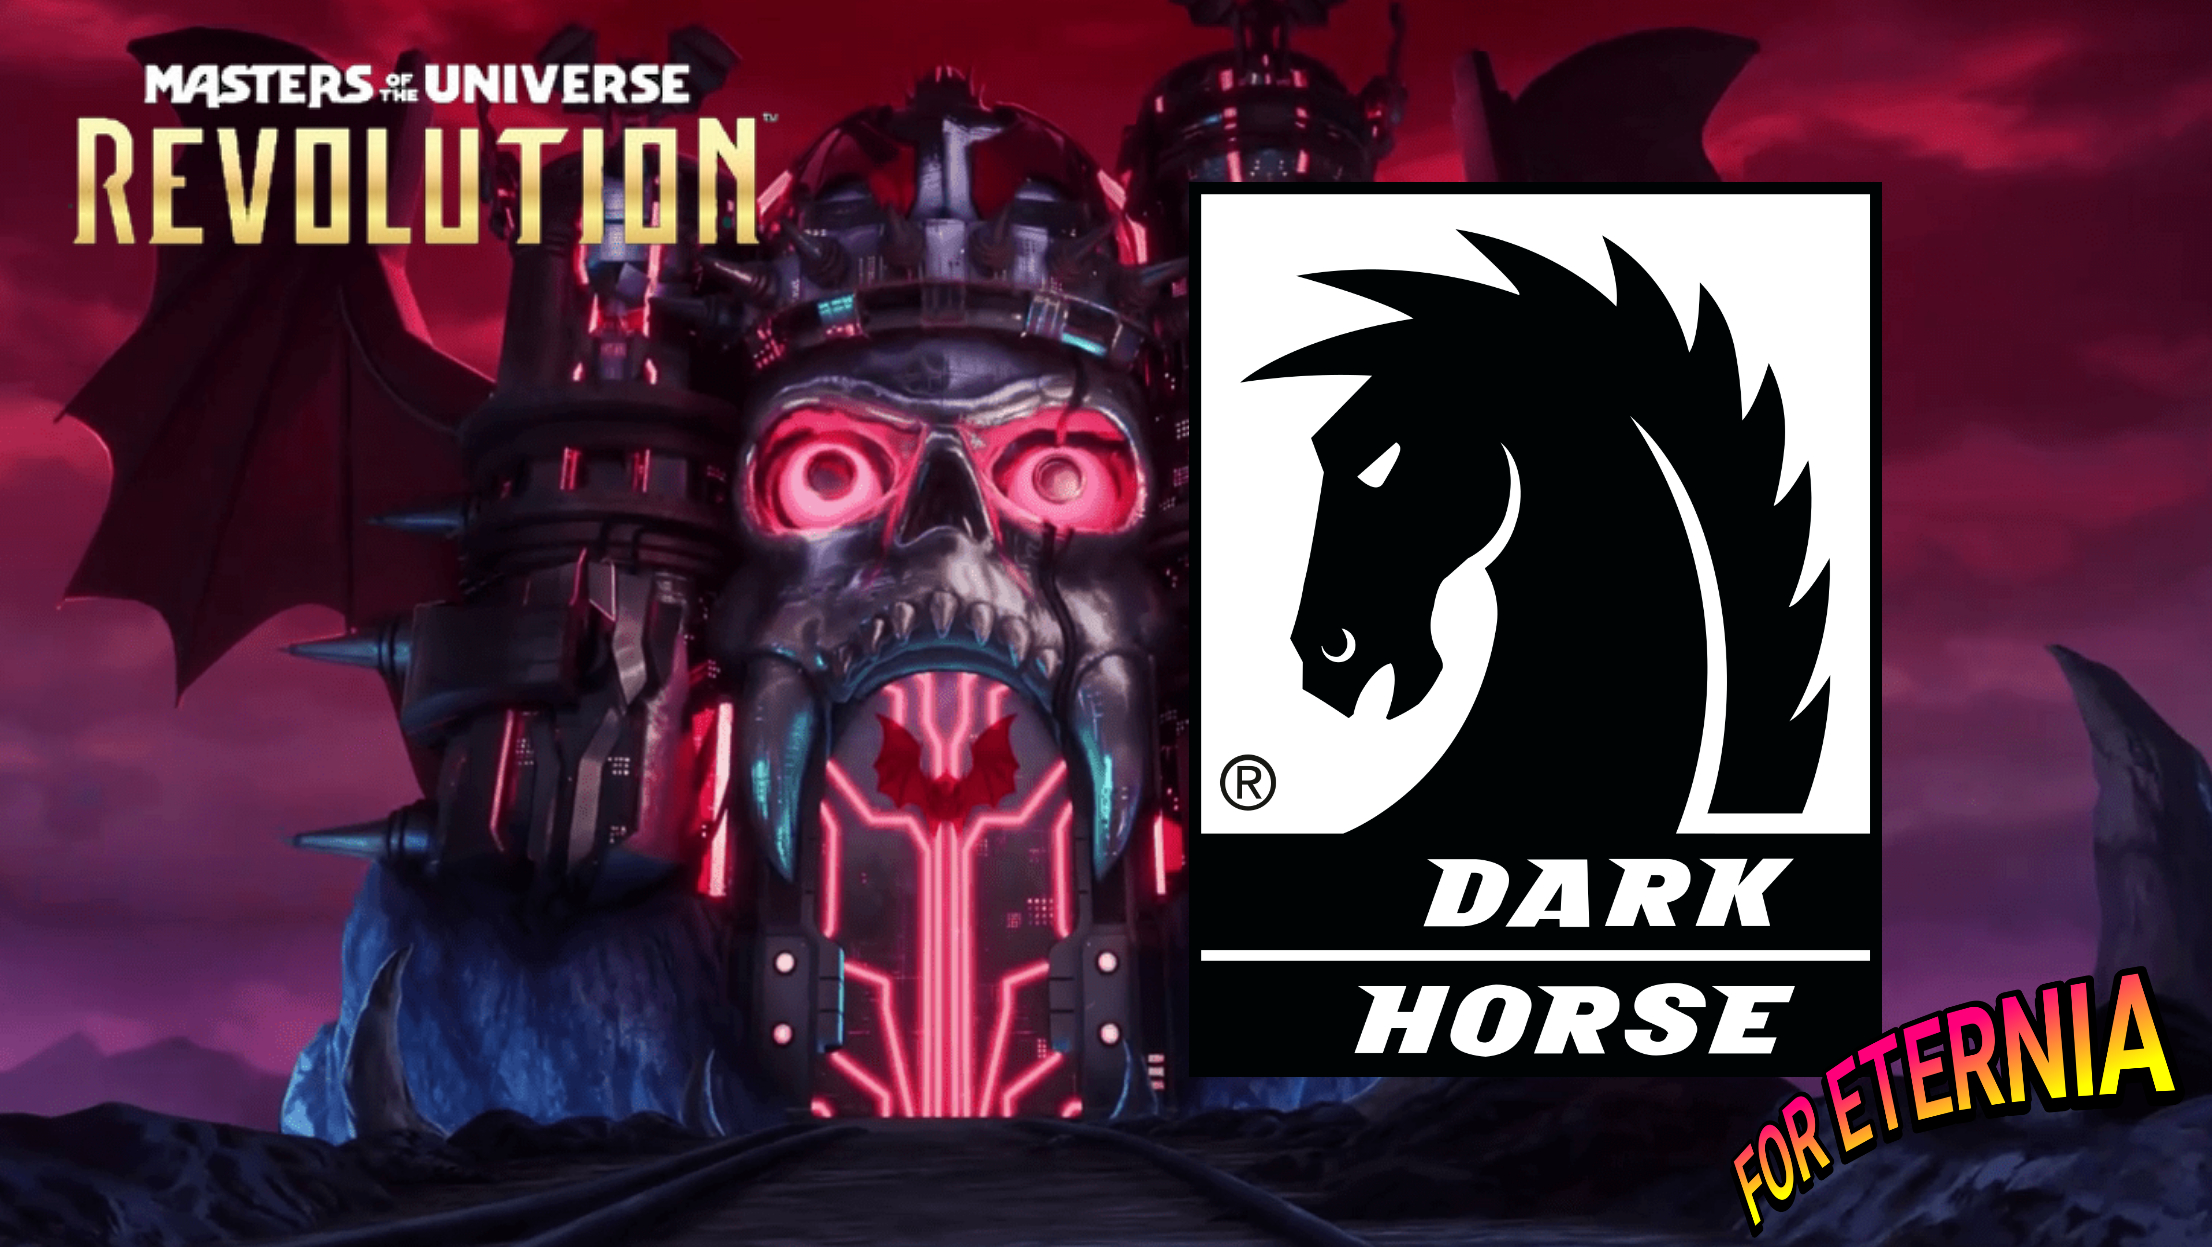 New ”Masters of the Universe: Revolution” Art Book in the works at Dark Horse?